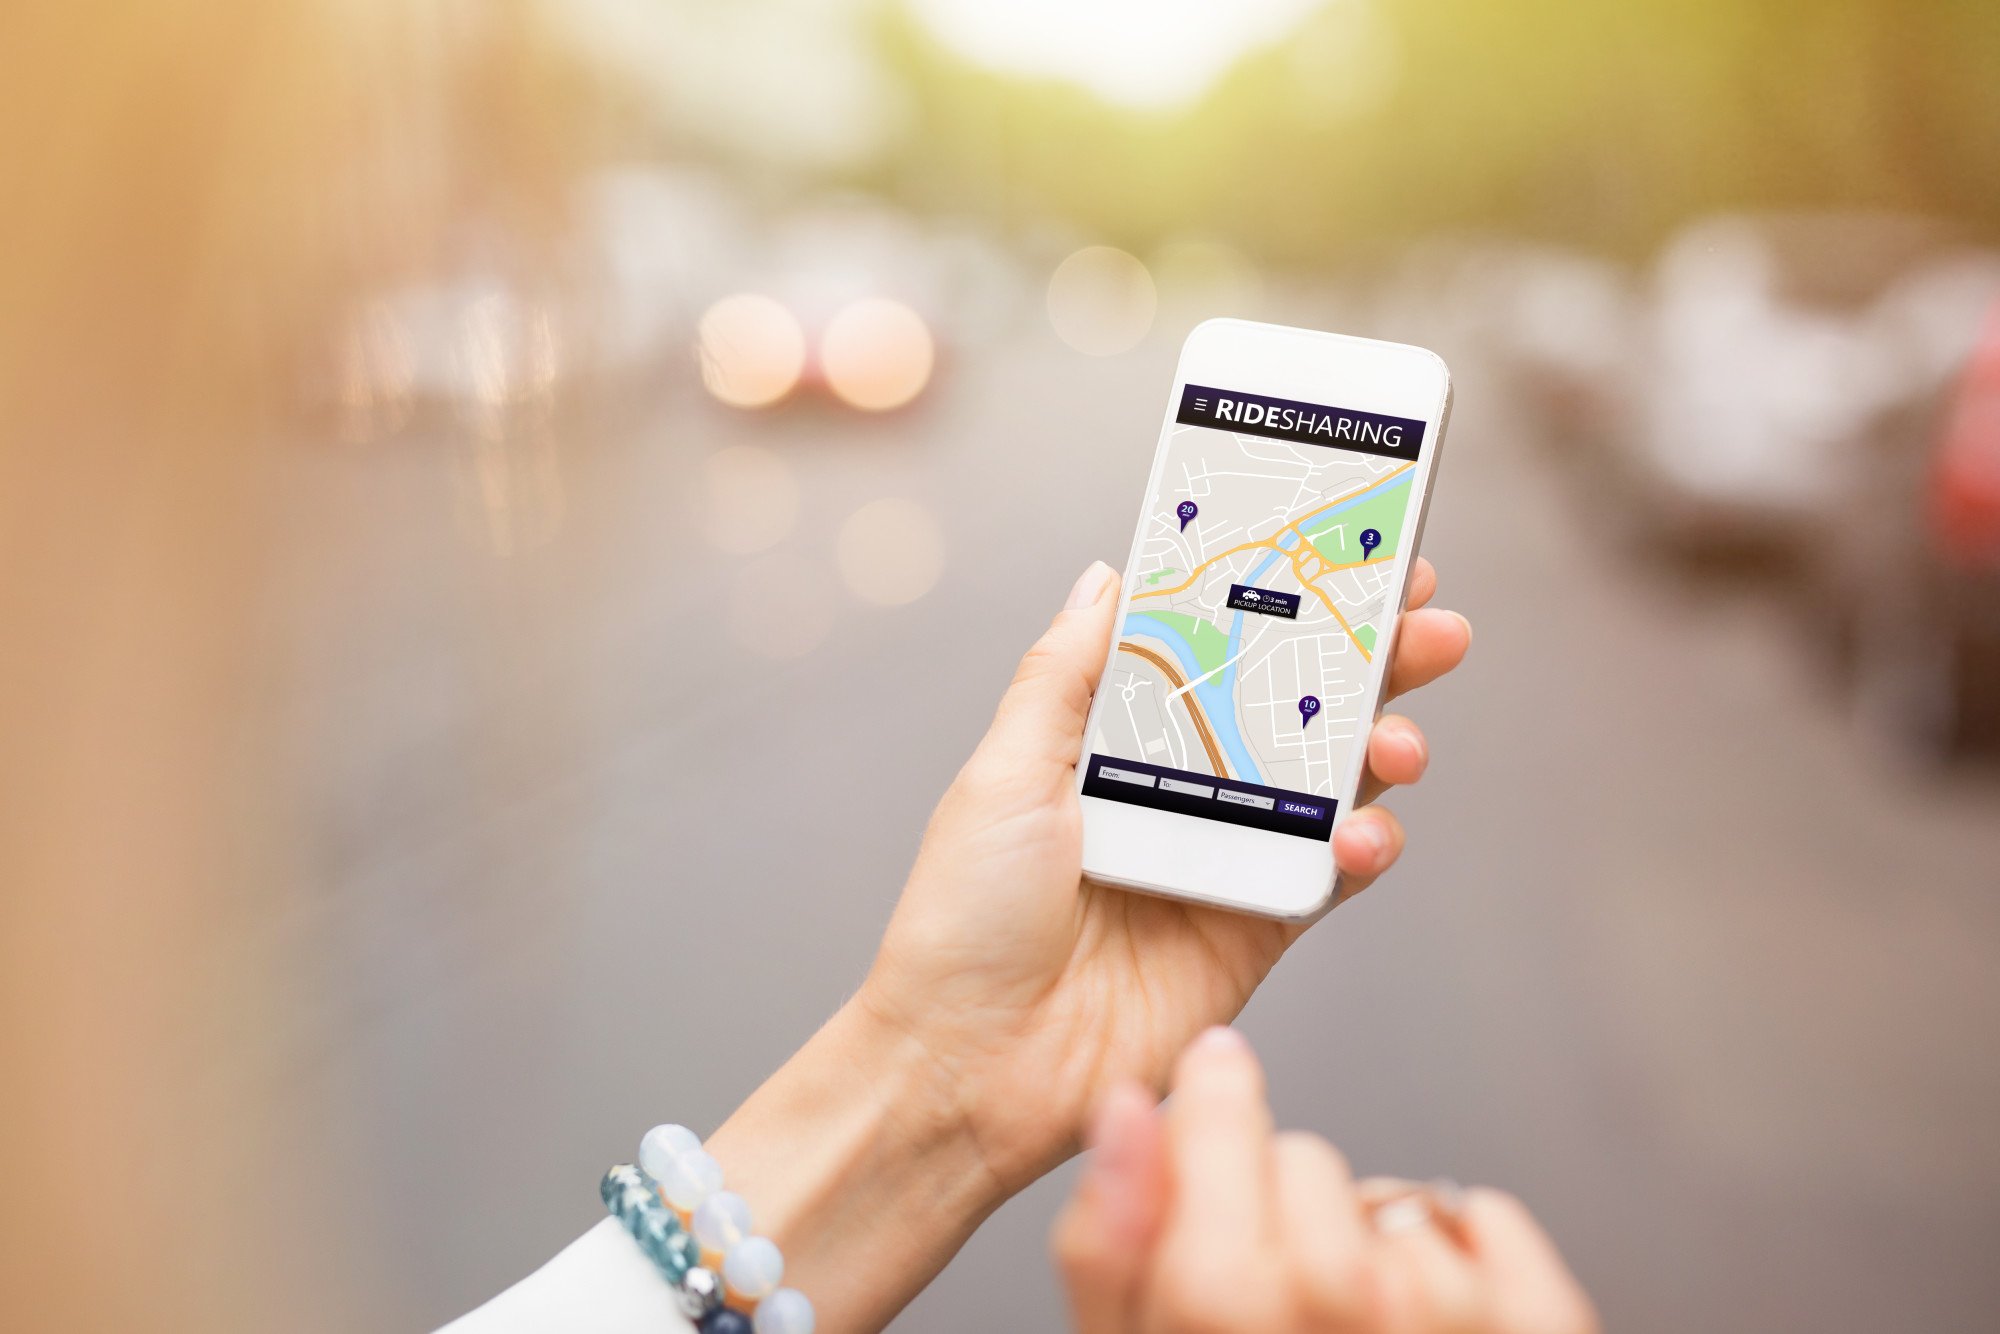 Working for Uber? Here's How to Maximize Your Ridesharing Income...